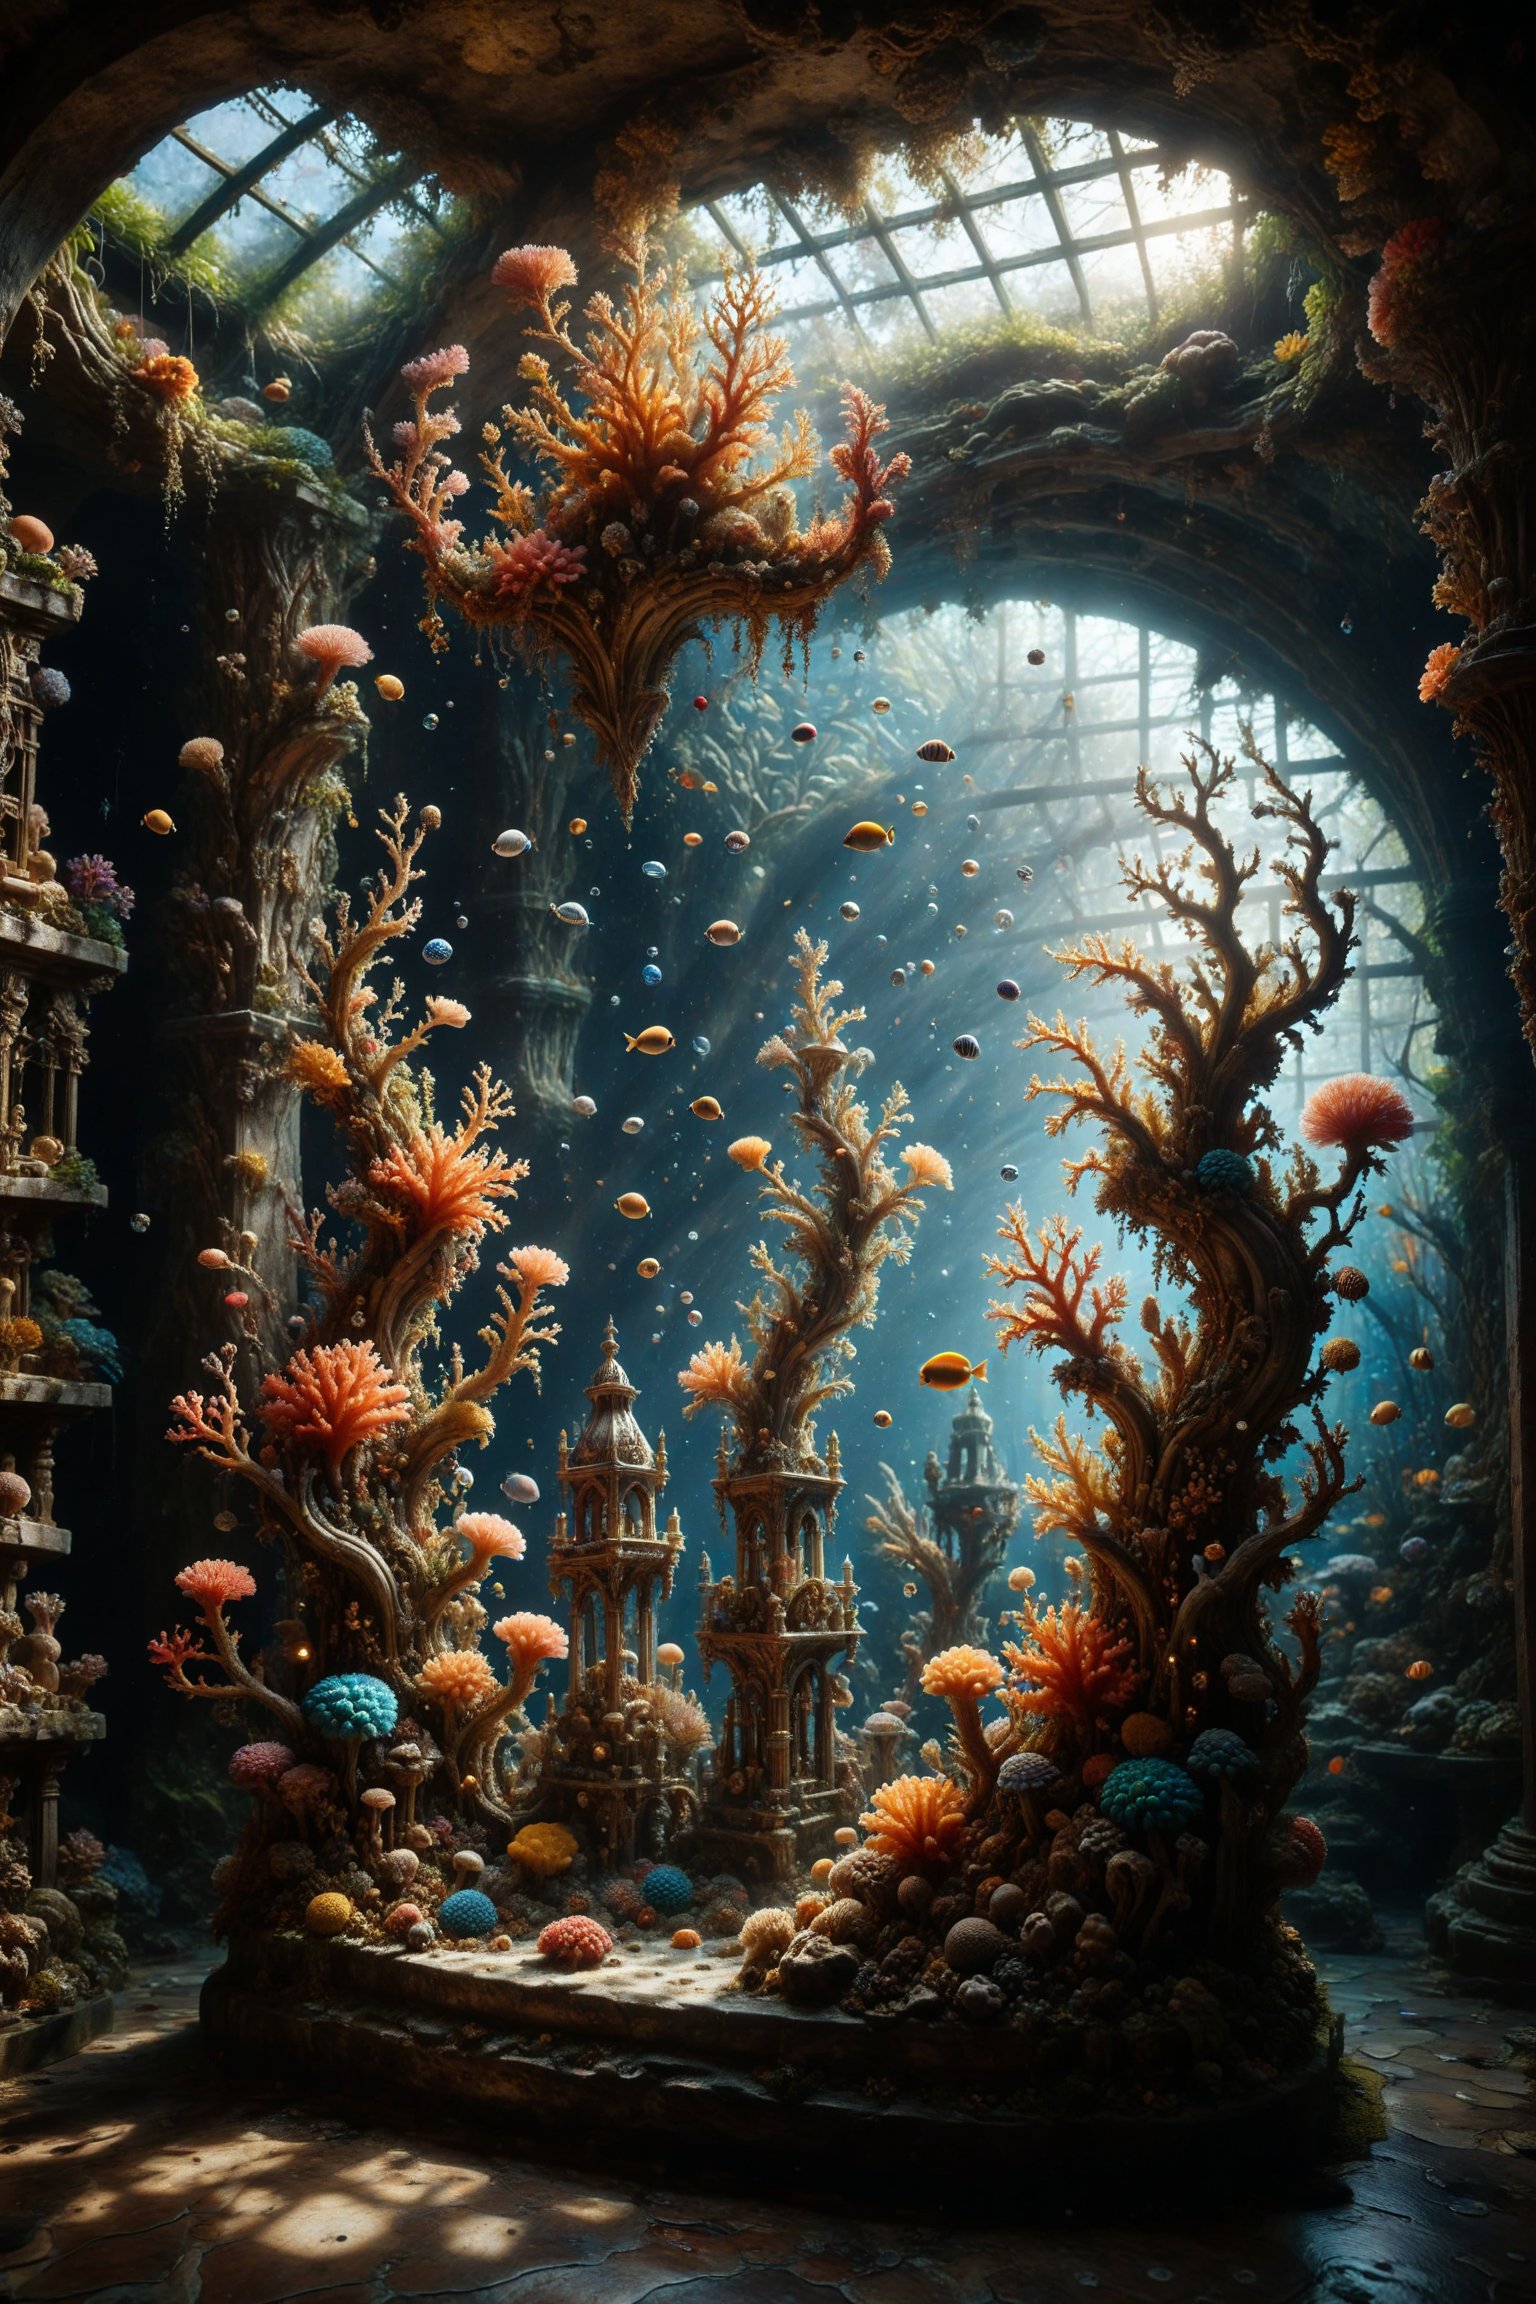 An aquarium with interesting, surreal organic curves, filled with colorful corals and candelabras simulating sunlight filtering from above. Inlaid corals, decorative gold accents, feathers, diamonds, and iridescent bubbles.